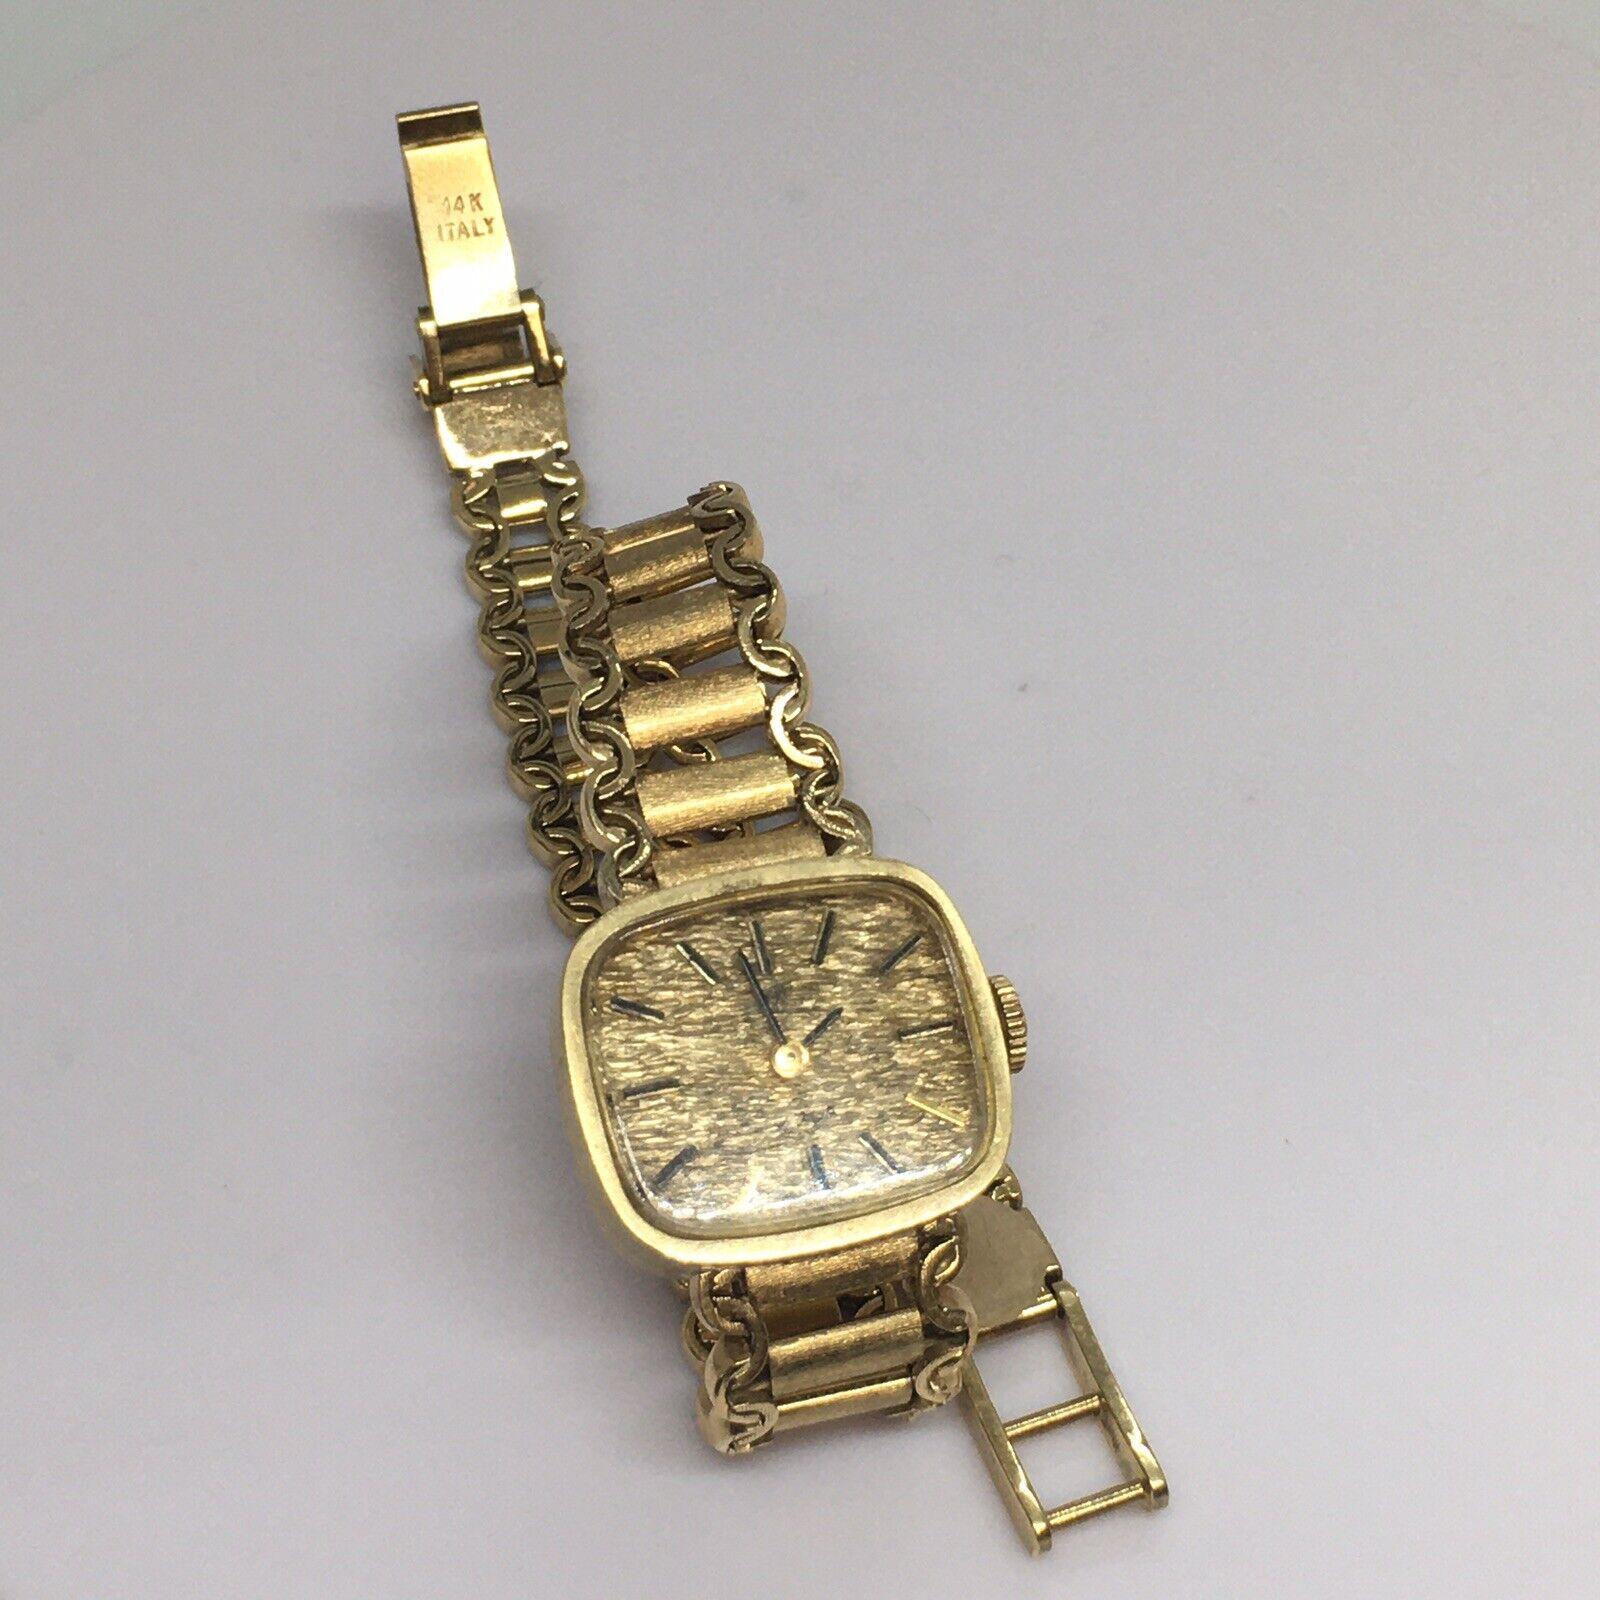 Lady's Omega 14K Yellow Gold Mechanical Watch Factory Marked Case 8 inch long

Wrist Length 8 inch
Case 18 mm by 20 mm
Bracelet starting at 13 mm on top and 8 mm next to lock 
Marking  